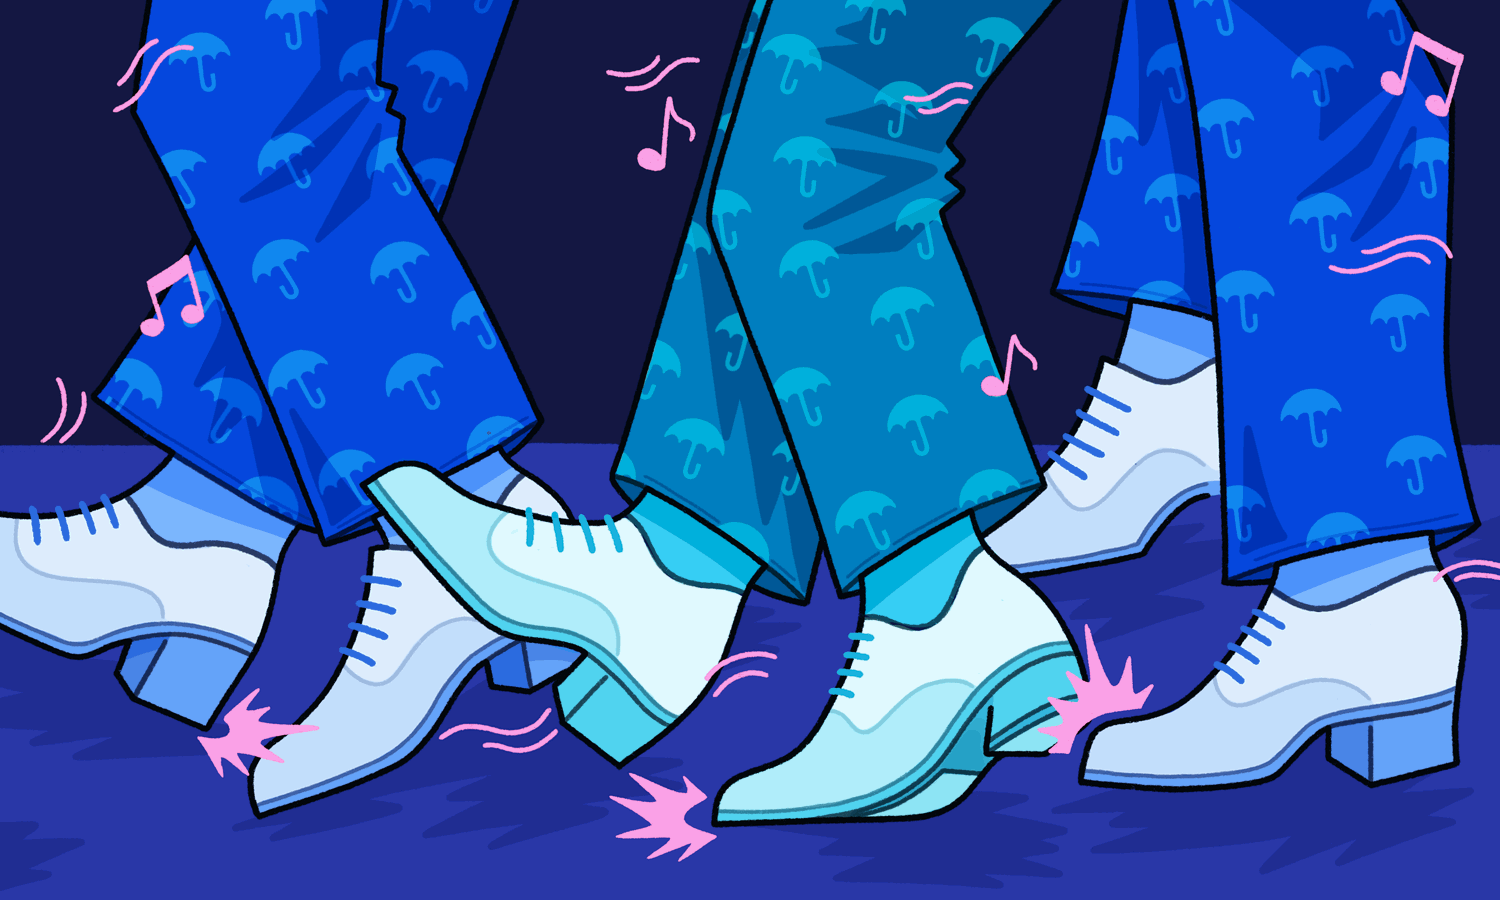 We see three pairs of legs and three pairs of tap shoes all in motion, with pink sparks and music notes jittering around. Each of the pant legs have patterns of little umbrellas to reference the famous musical, Singing in the Rain.